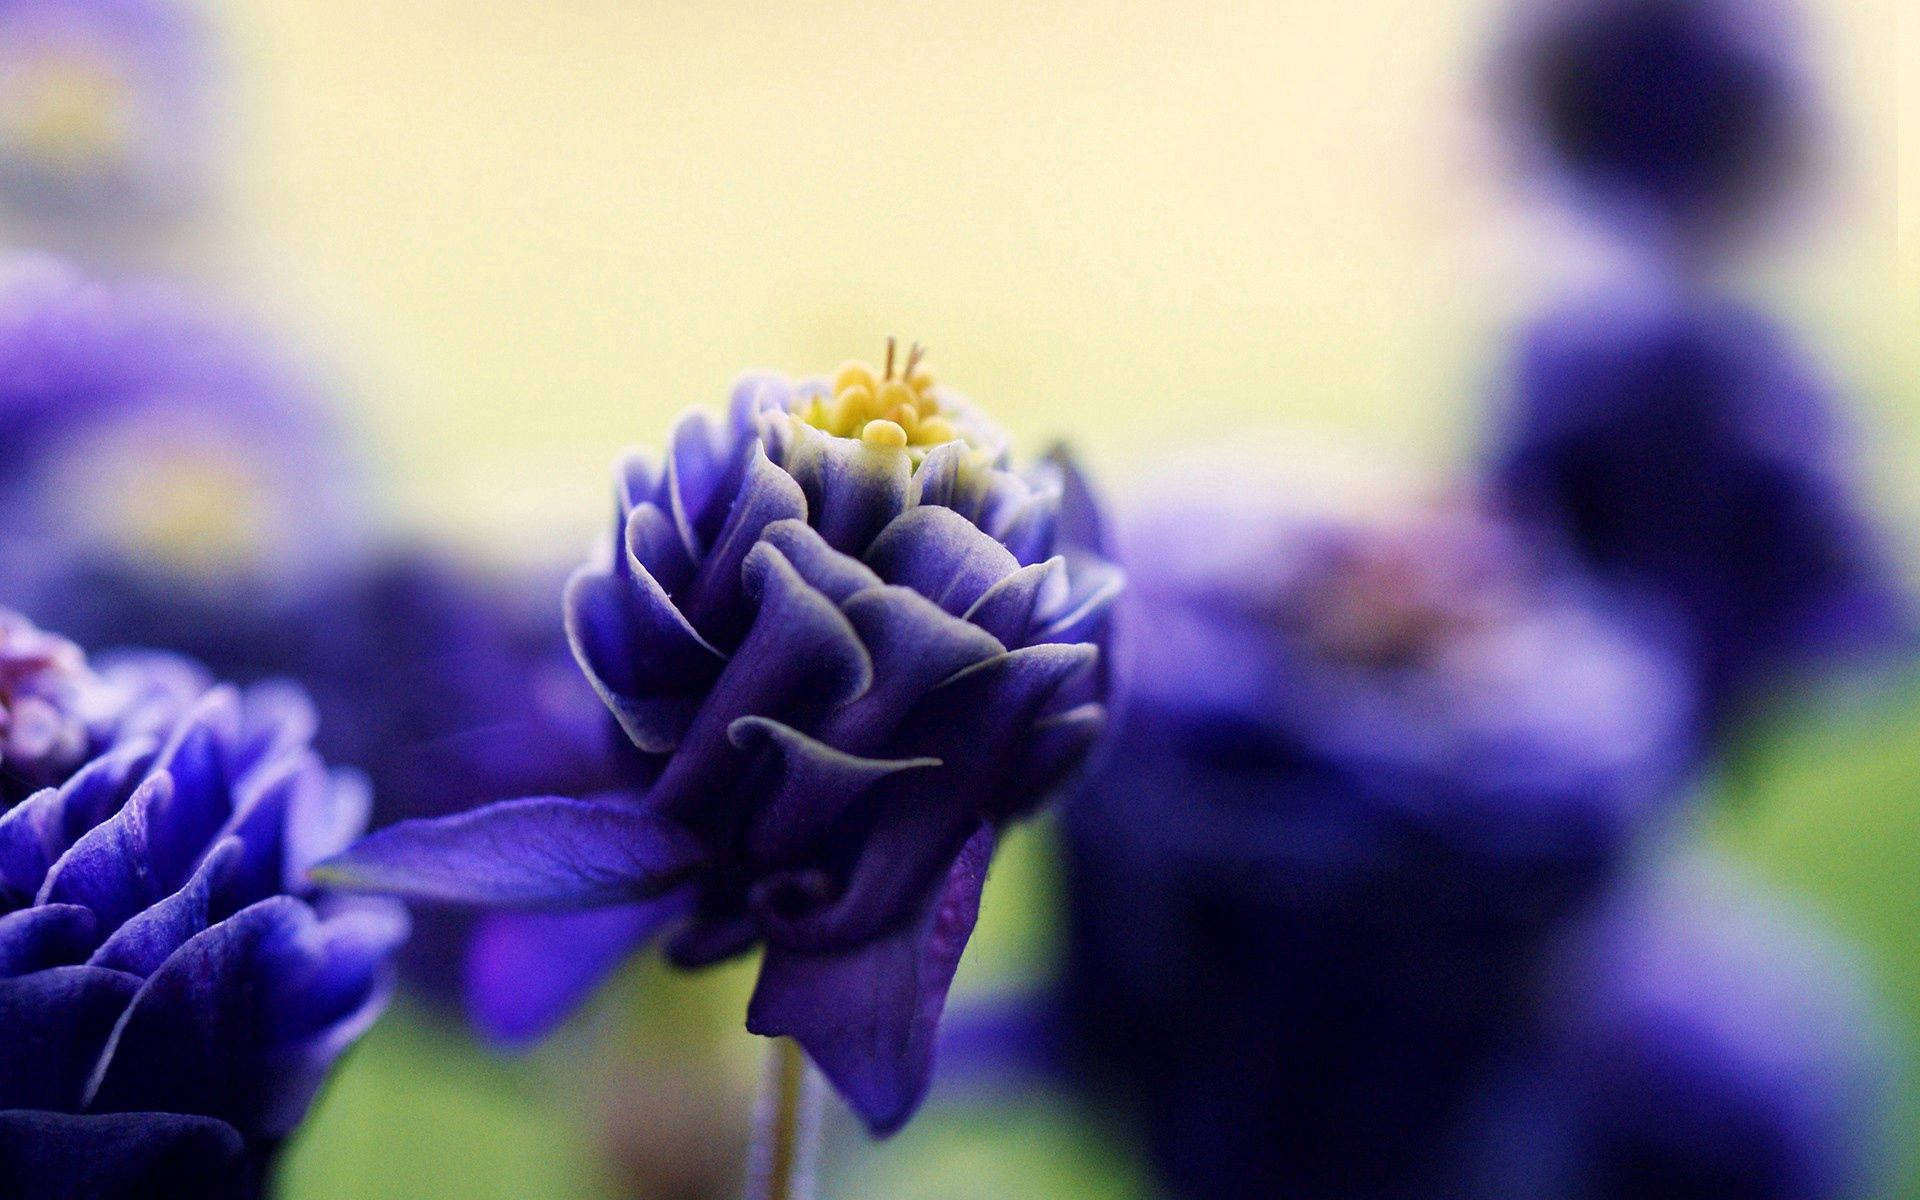 Let nature inspire your day with this beautiful purple flower. Wallpaper